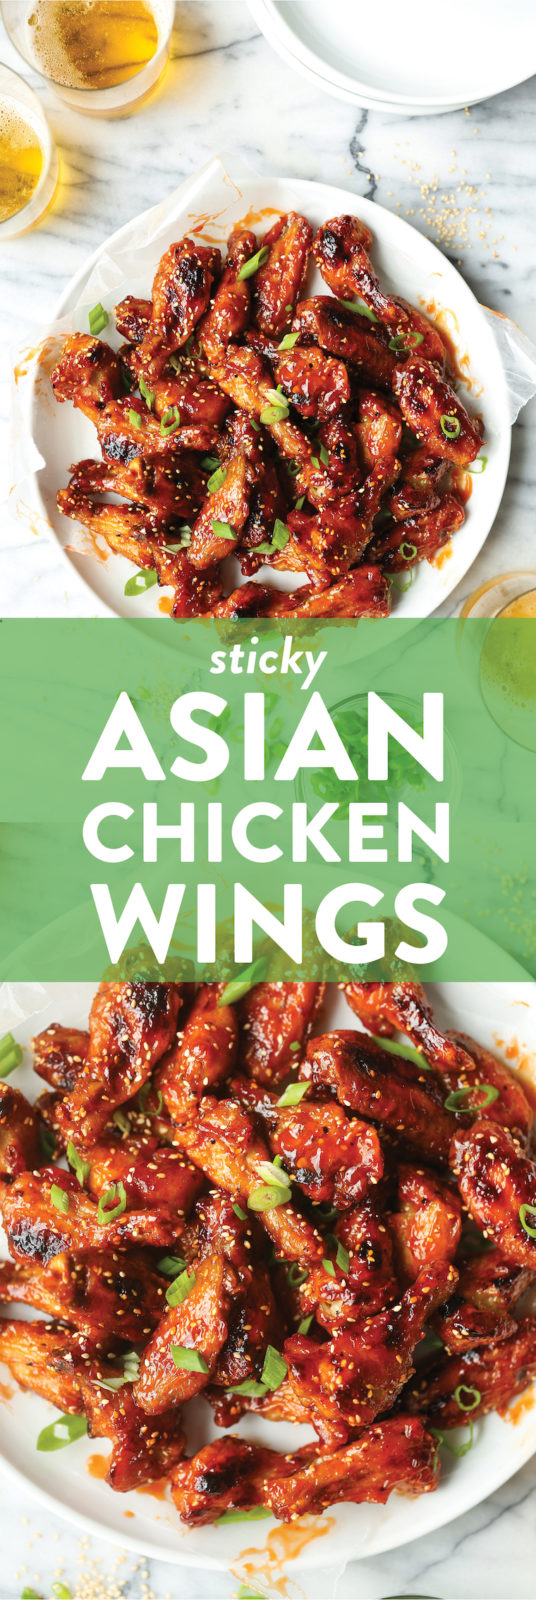 Sticky Asian Chicken Wings - Damn Delicious